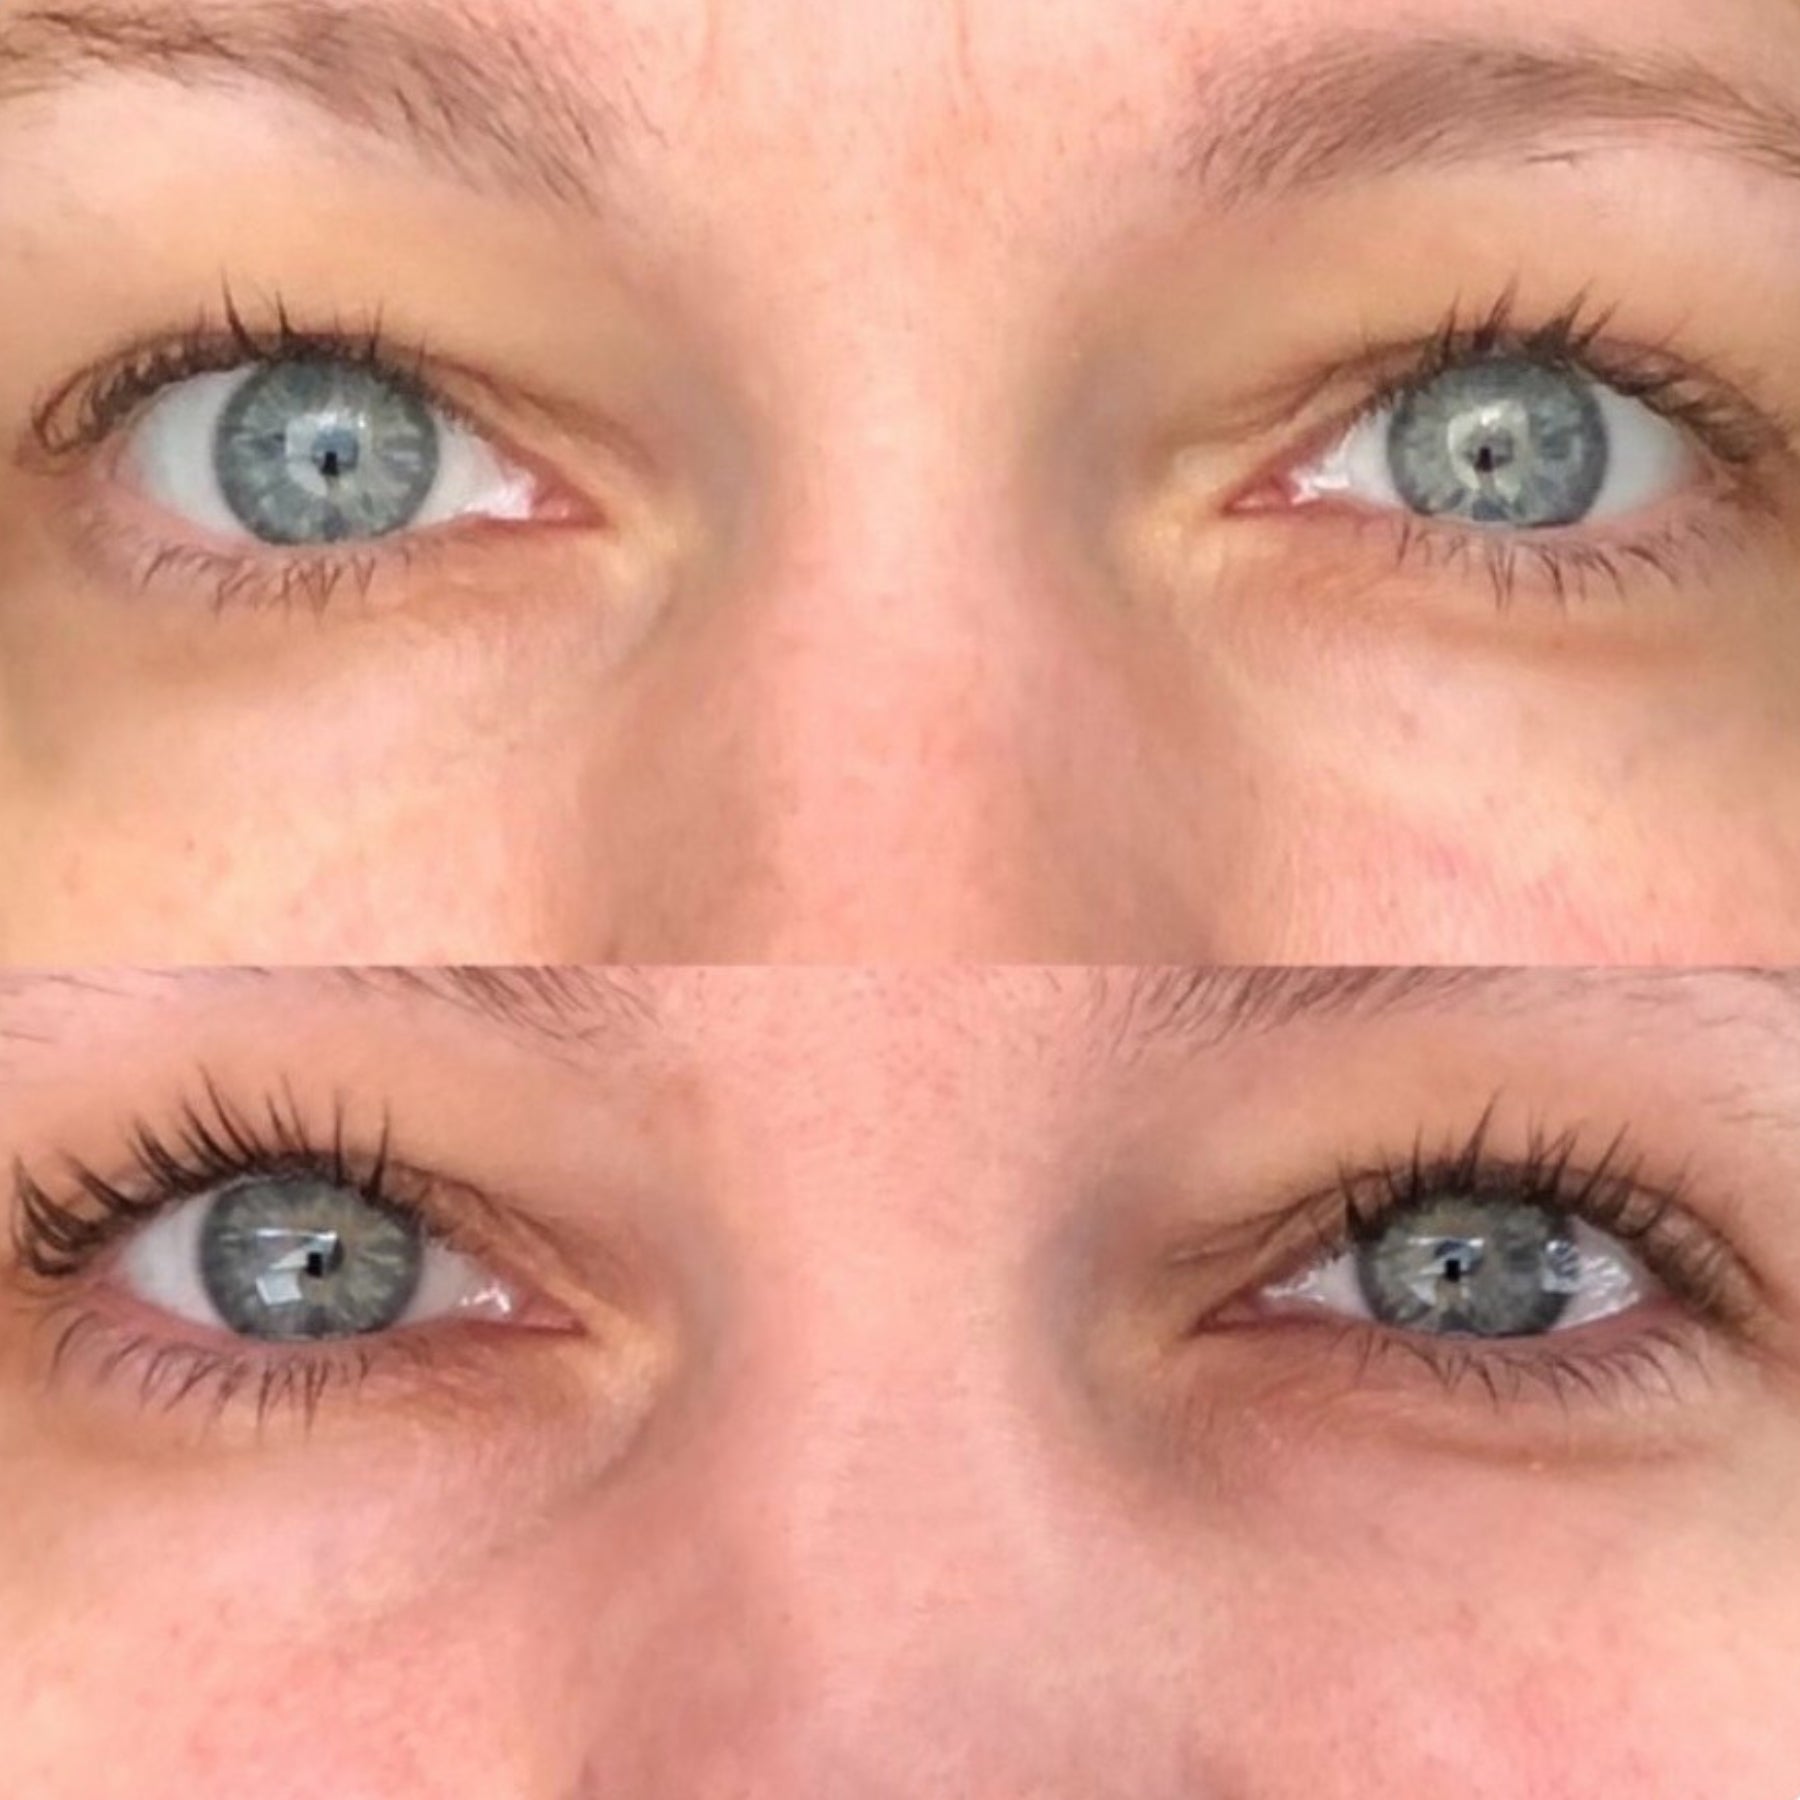 Testimonial photo of a woman's eyelashes after using the The Eye Balm™.